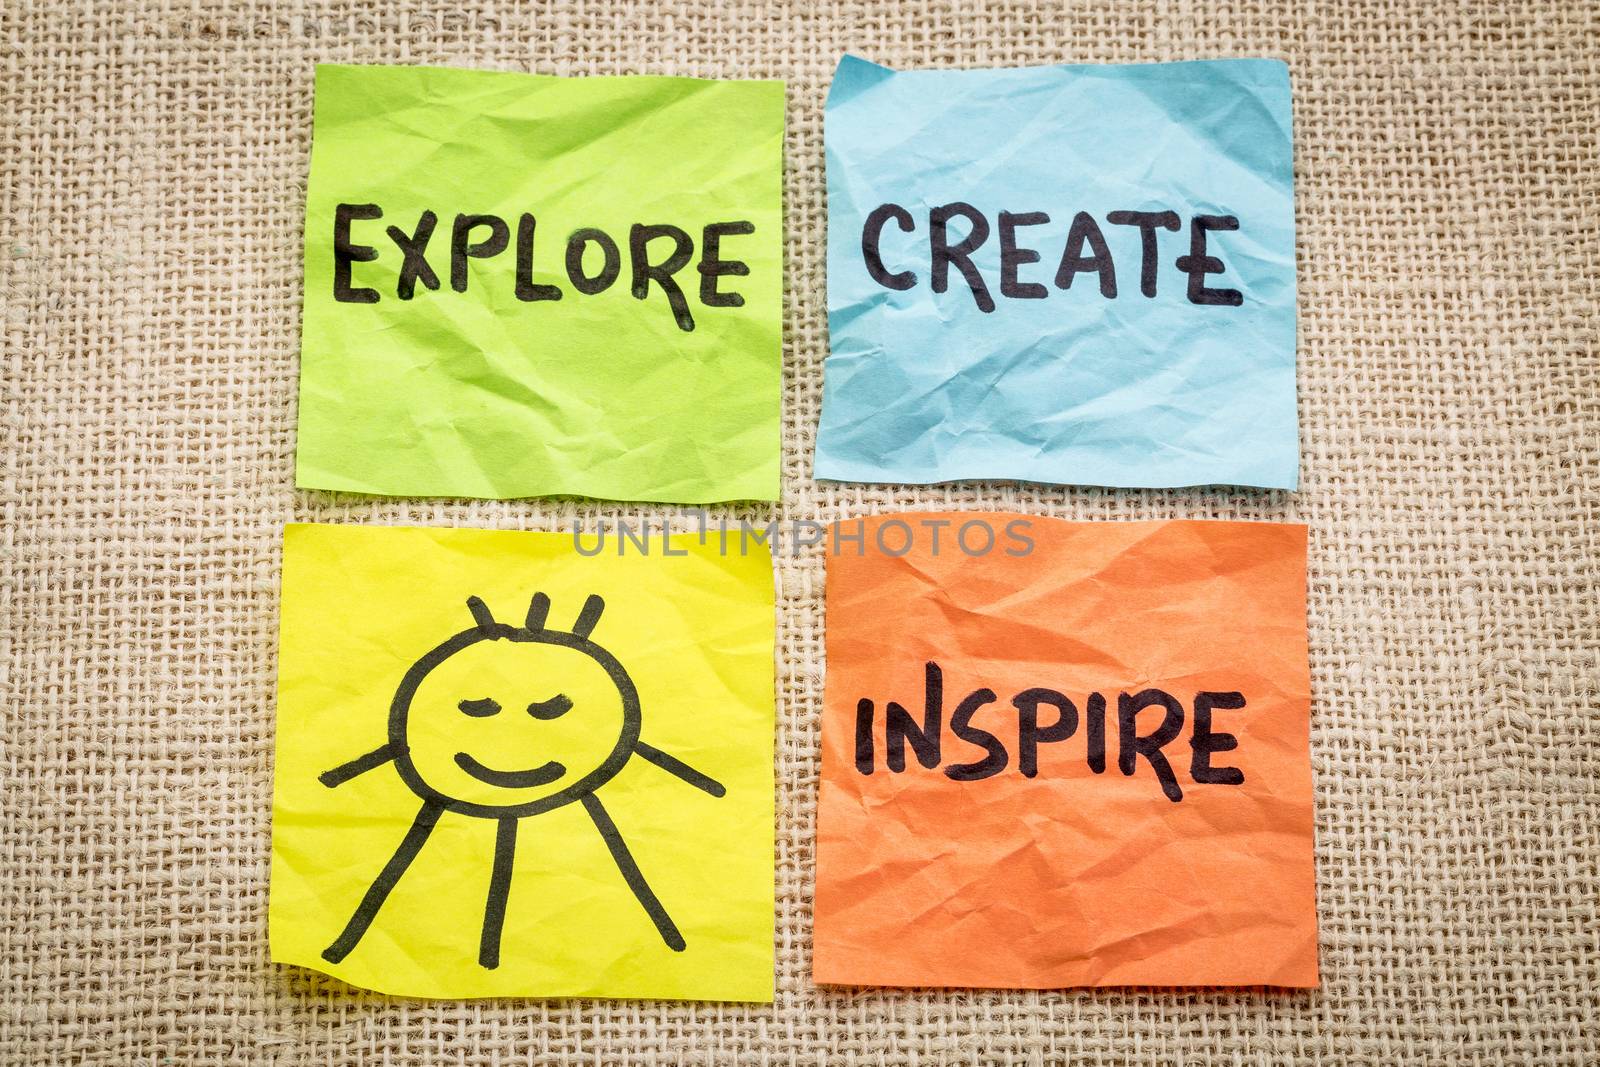 explore, create, inspire and smile reminder on sticky notes against burlap canvas